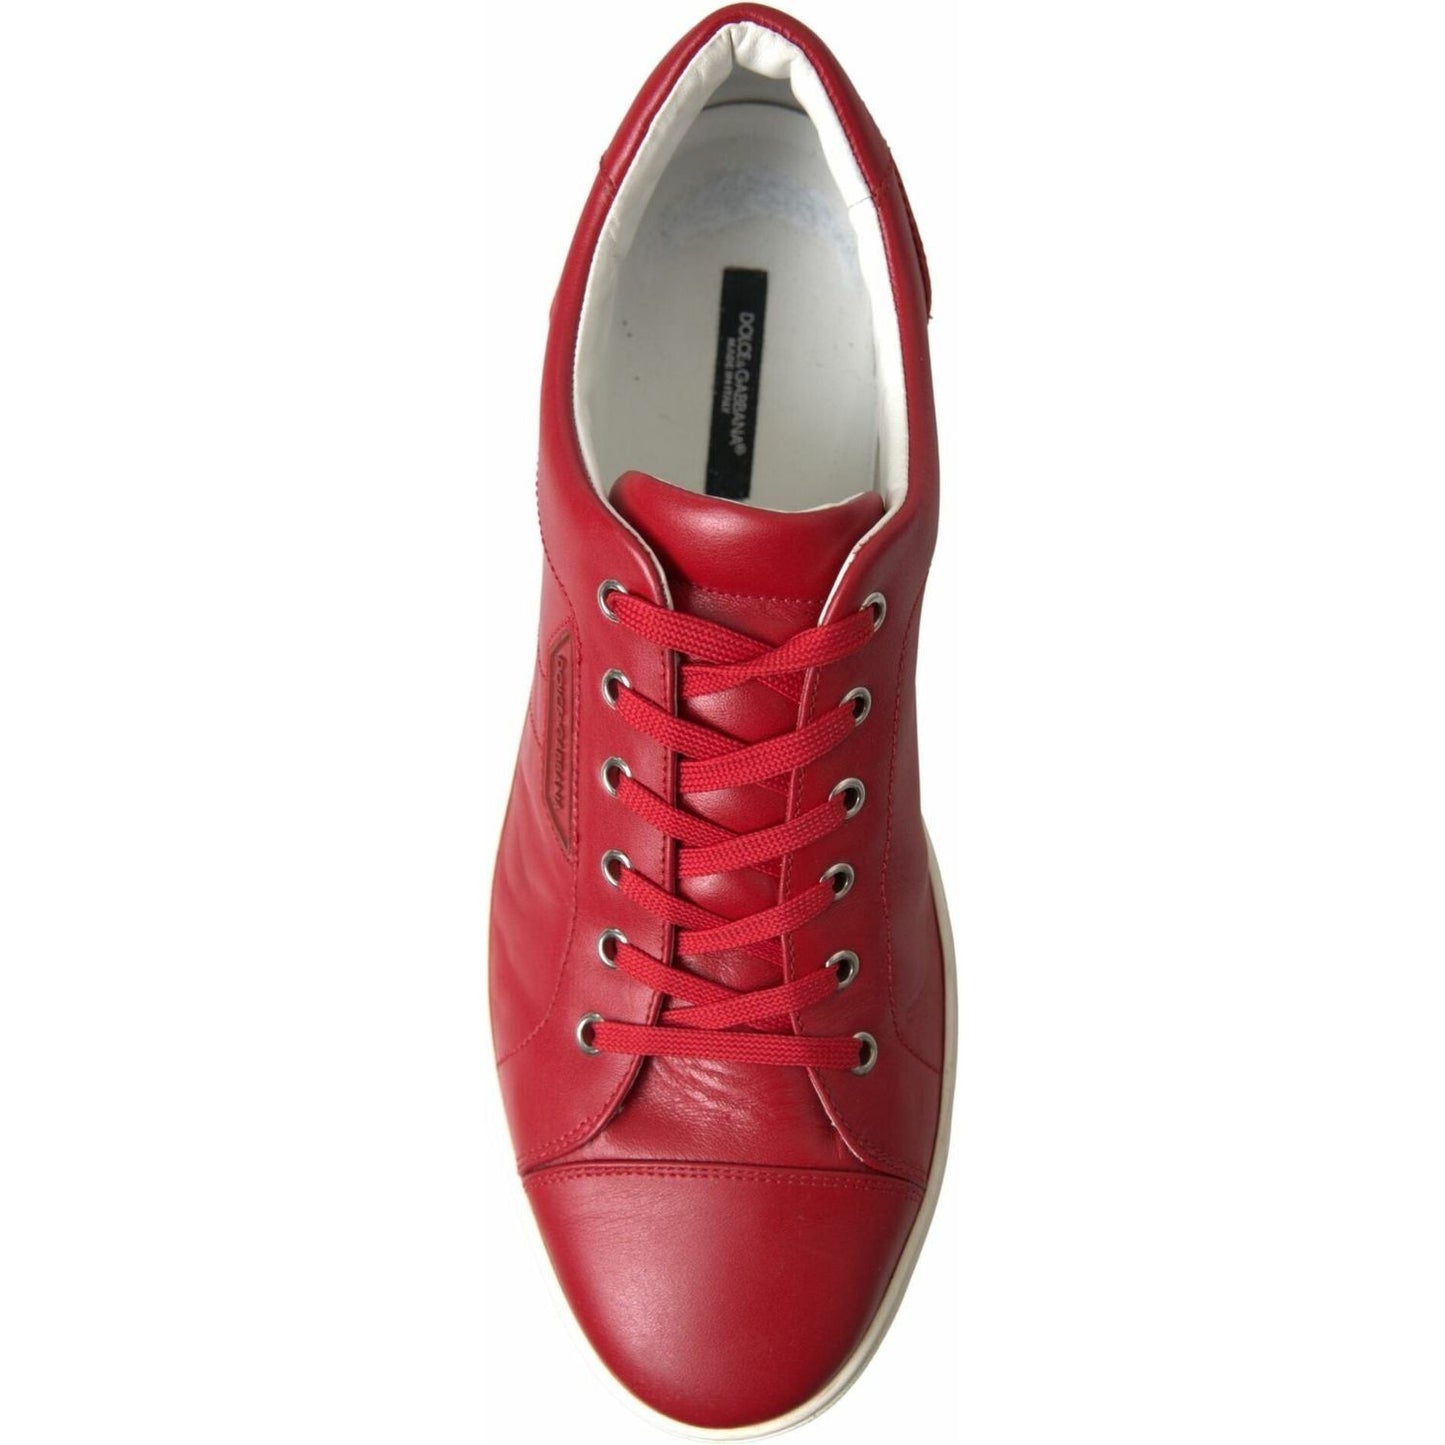 Dolce & Gabbana Elegant Red Leather Low Top Sneakers shoes-red-portofino-leather-low-top-mens-sneakers 6-scaled-7bc07261-37f.jpg